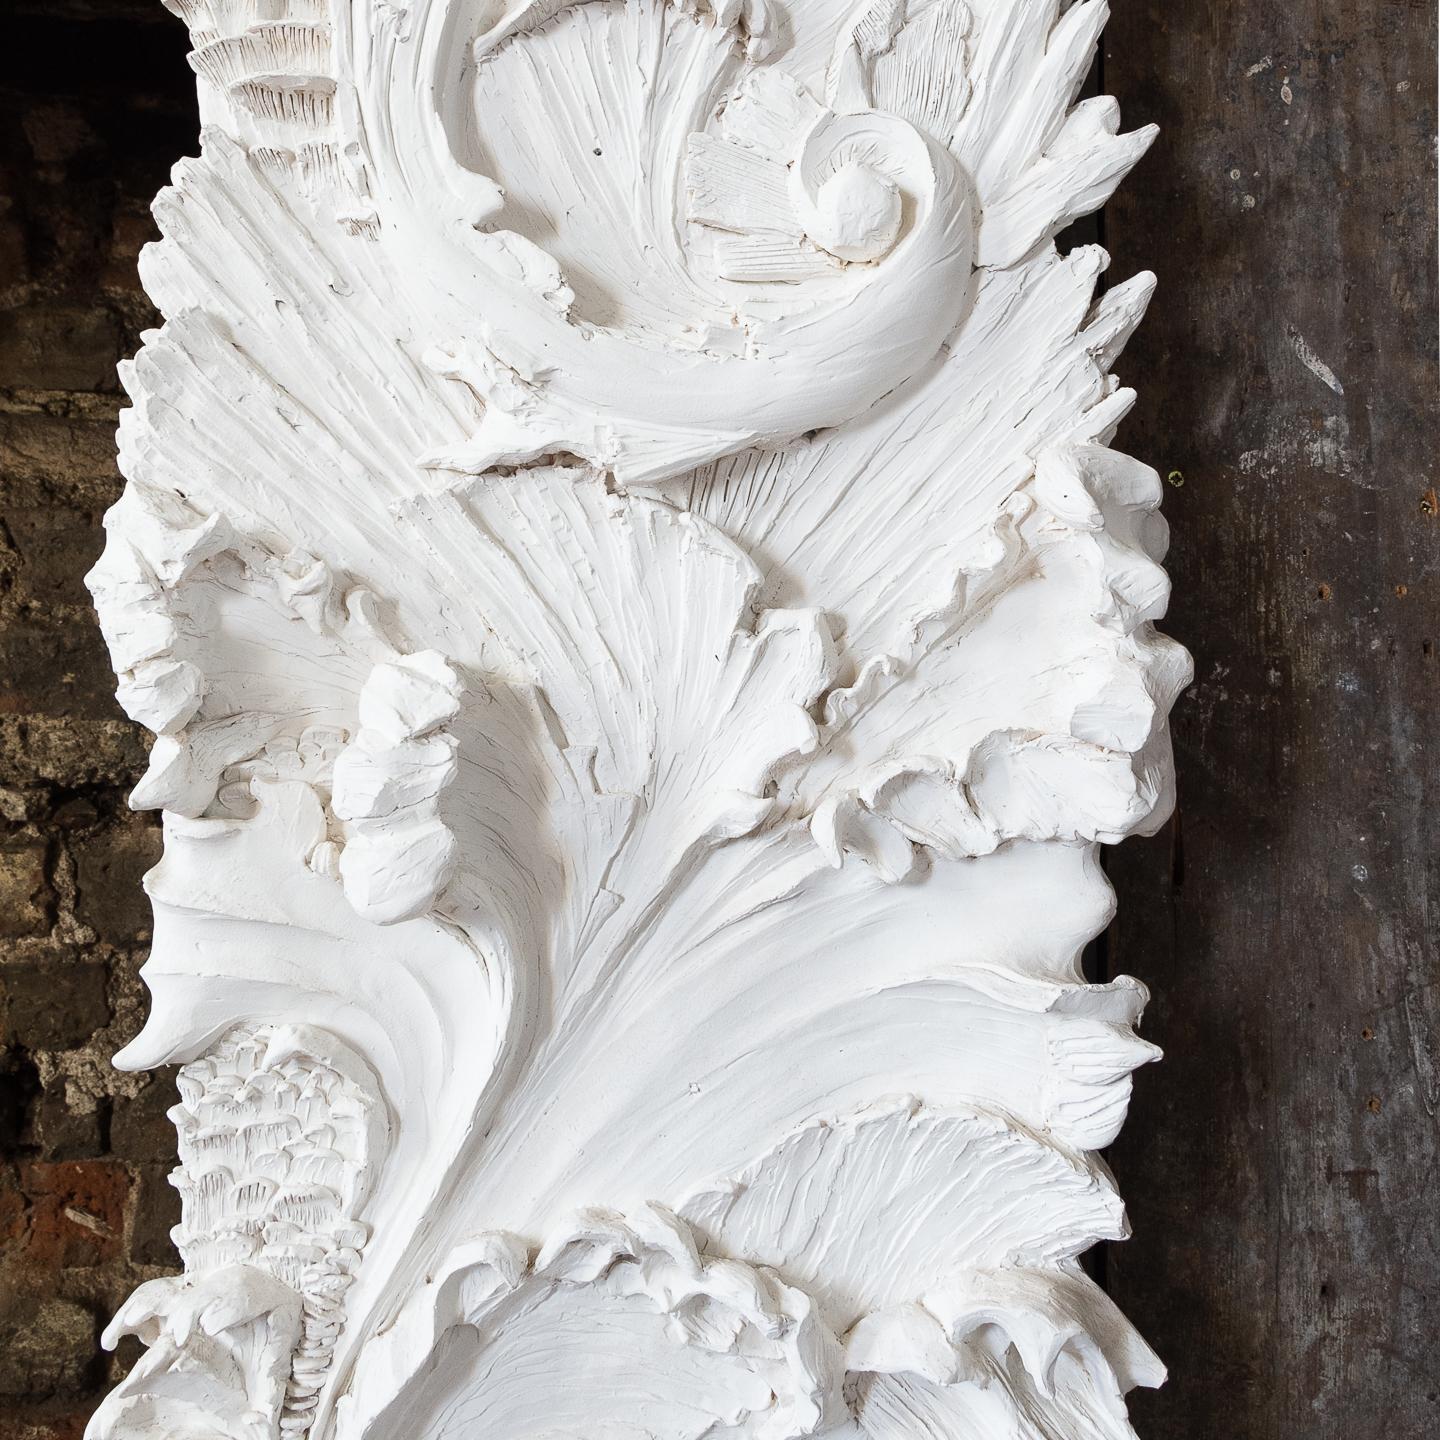 Highly unusual fire surround in the ‘Gothic-Baroque’ taste designed by Sarah Burton OBE and David Collins Studio, cast in Jesmonite, circa 2012.

Removed from the Alexander McQueen flagship store, Number 9 Savile Row, London.

This fire surround